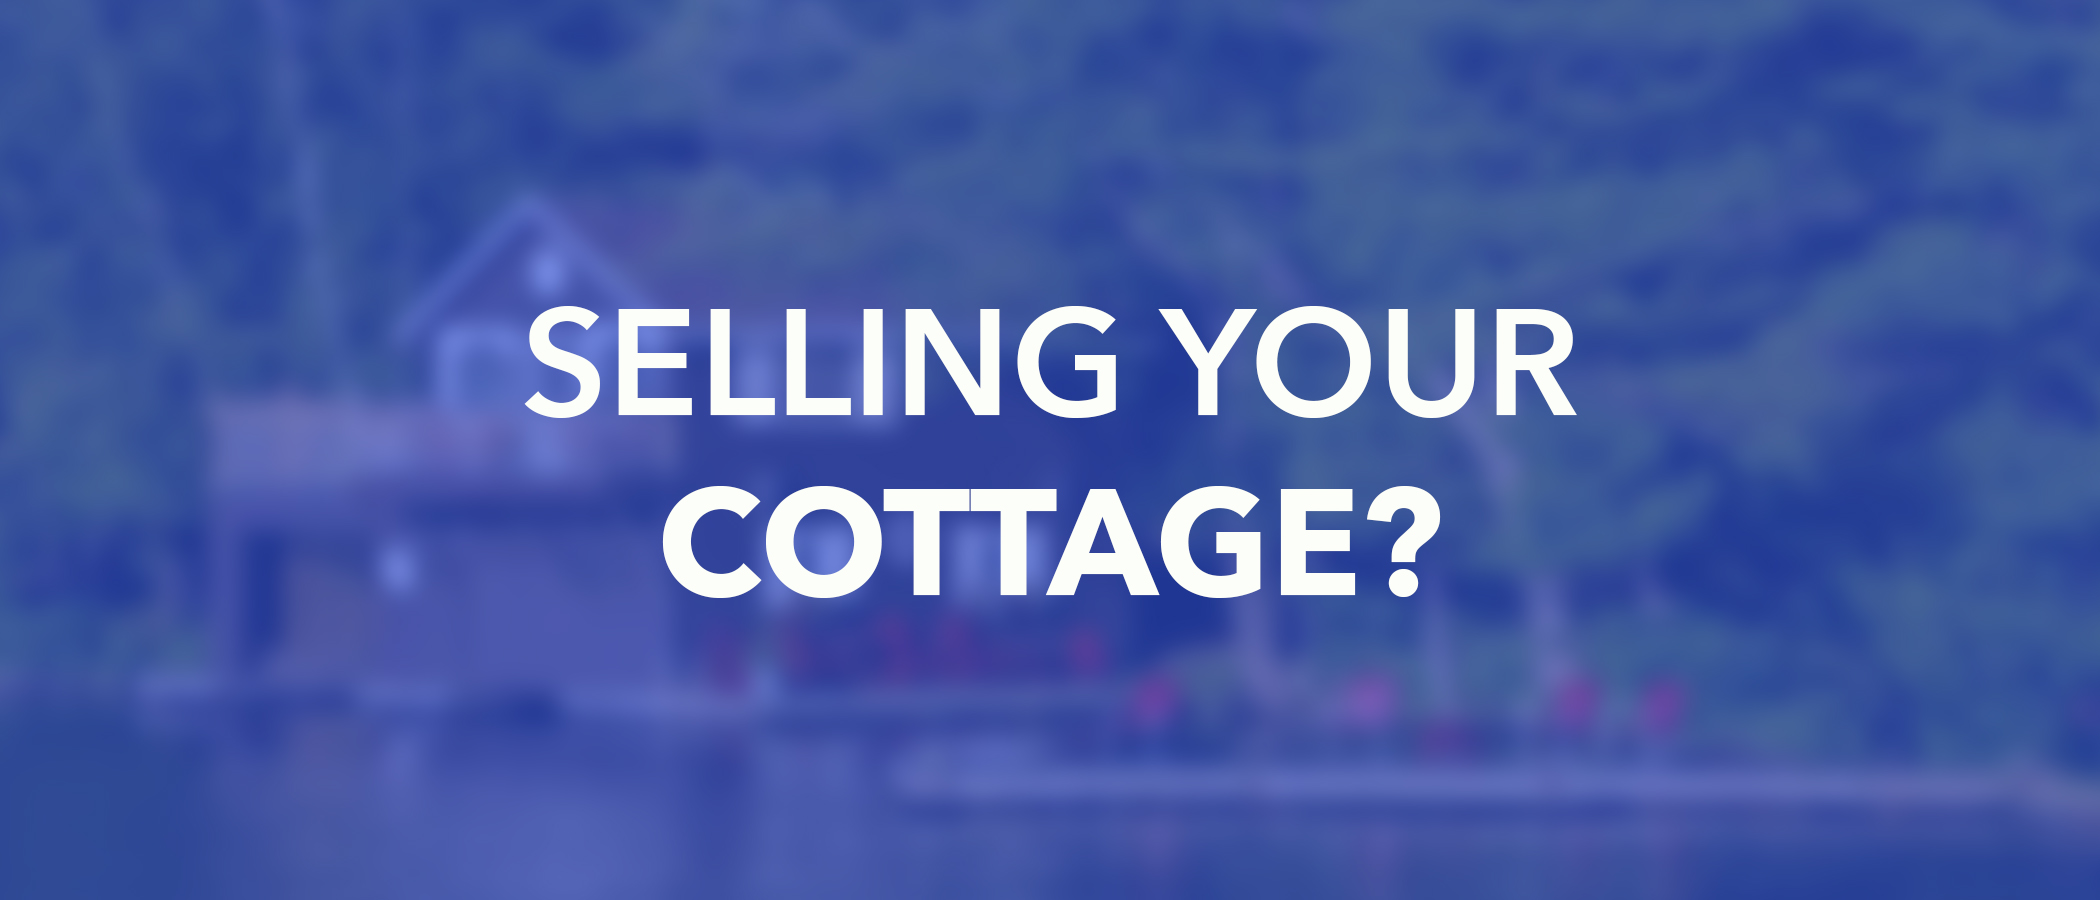 Selling Your-Banner-cottage